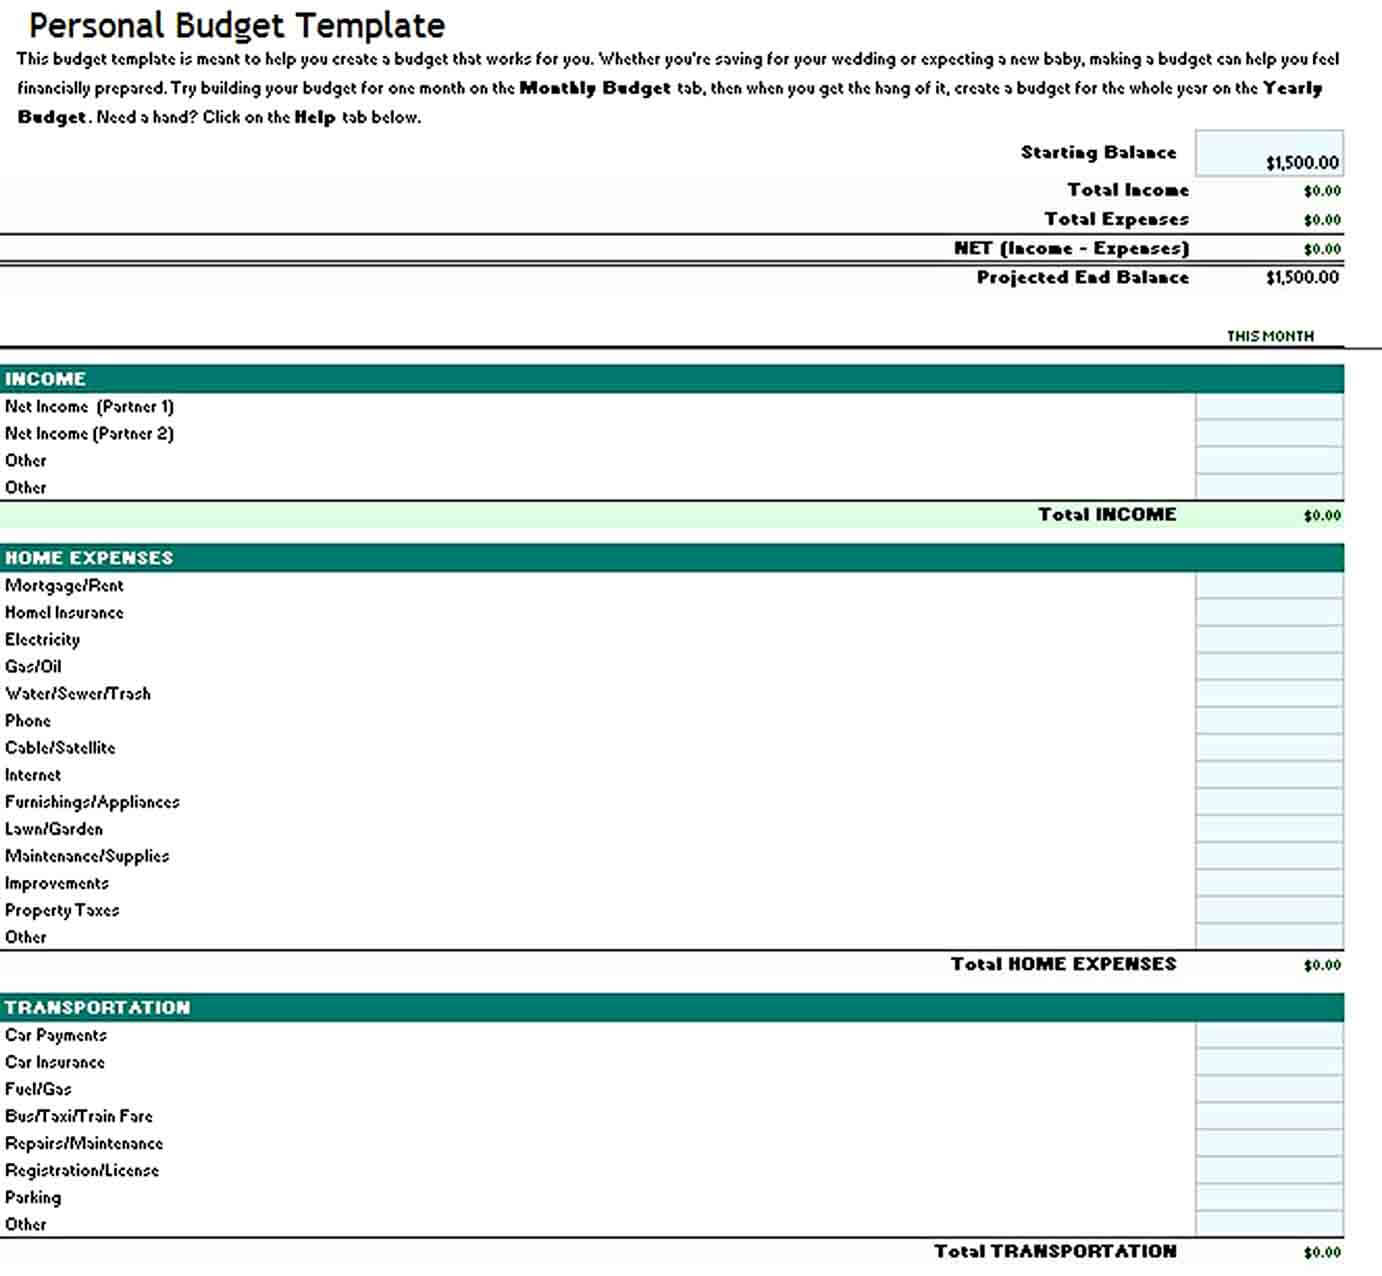 Excel Personal Budget Template